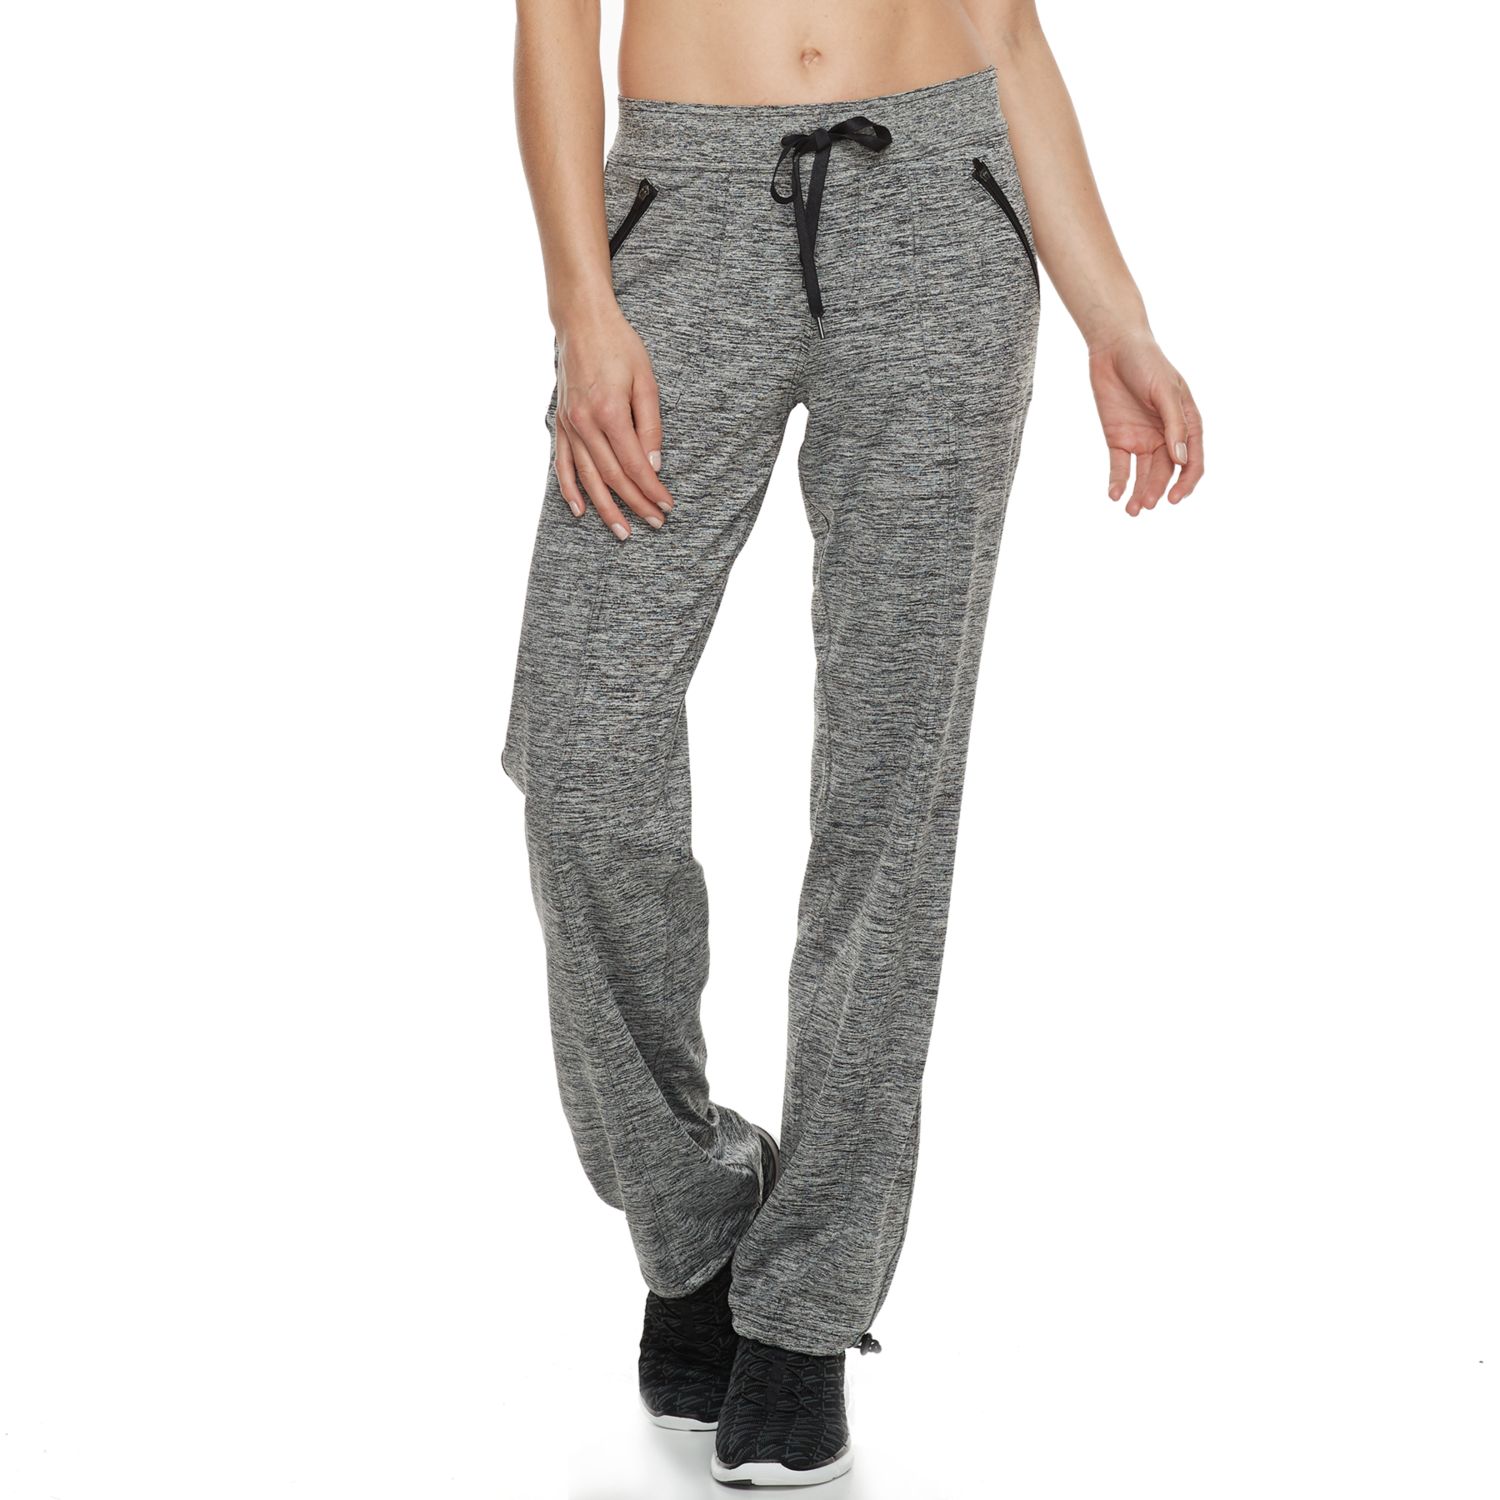 work out pants for women